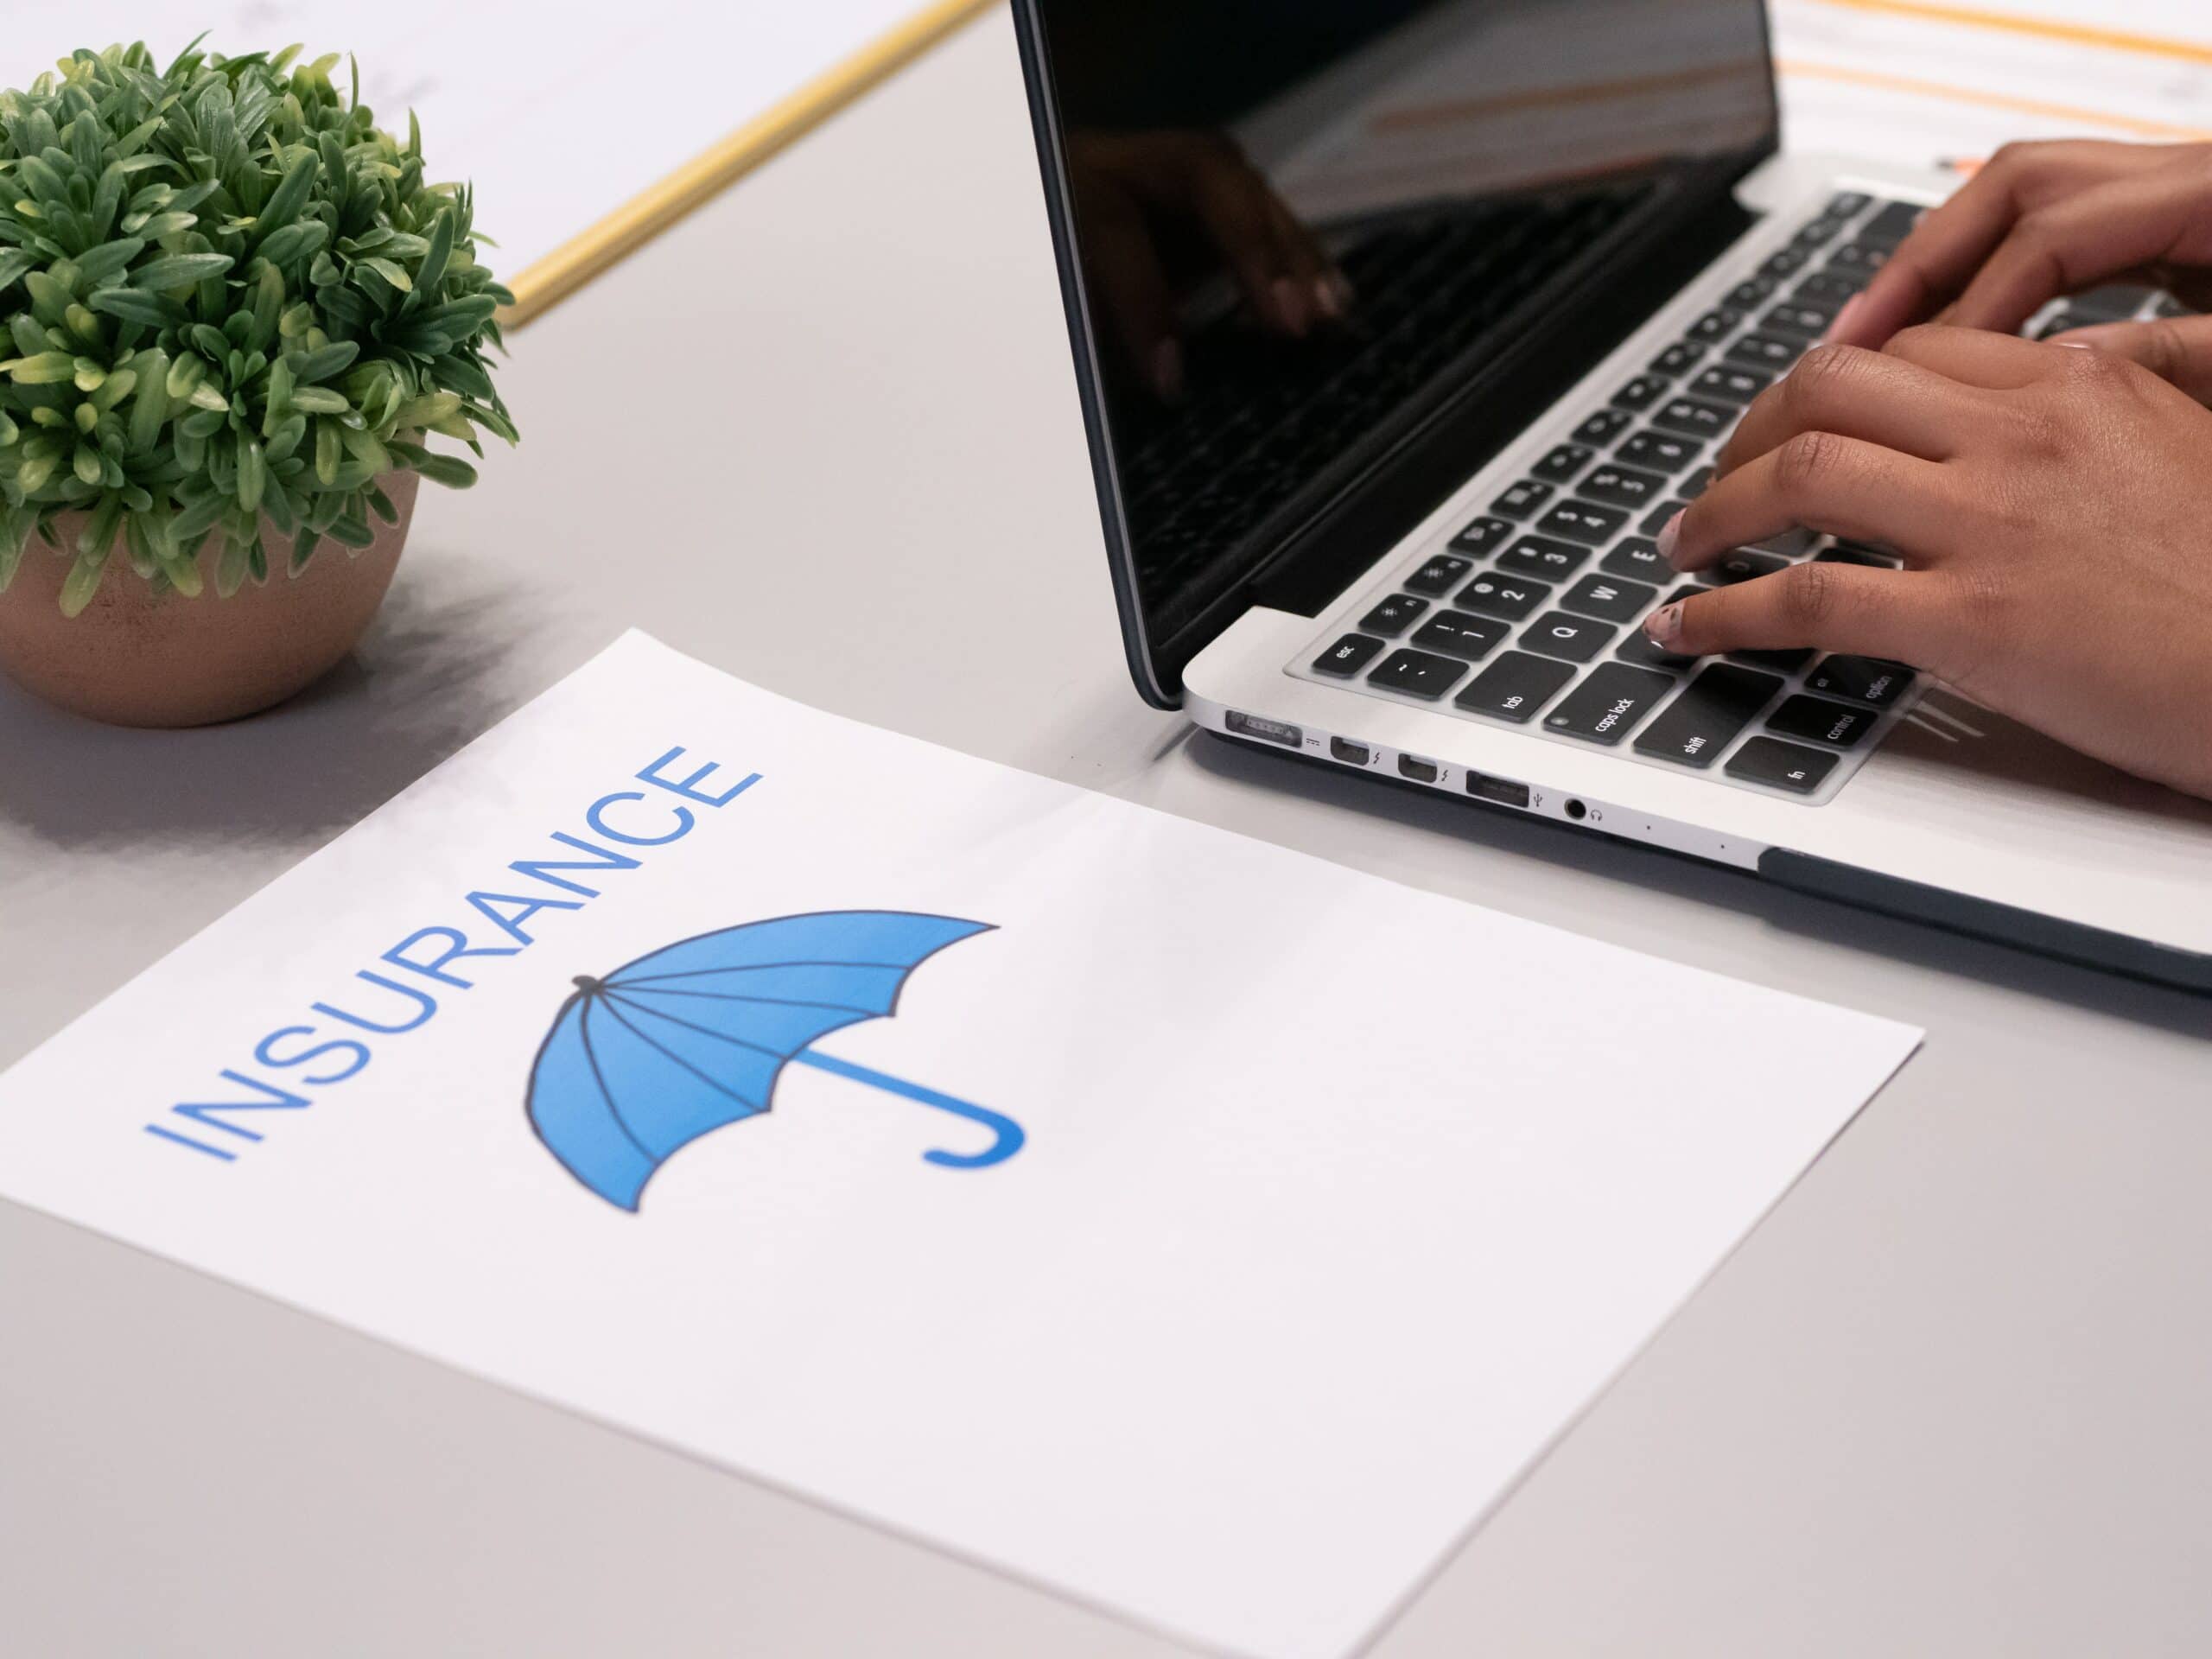 Chargeback Insurance: How Does It Work and Should You Get It?